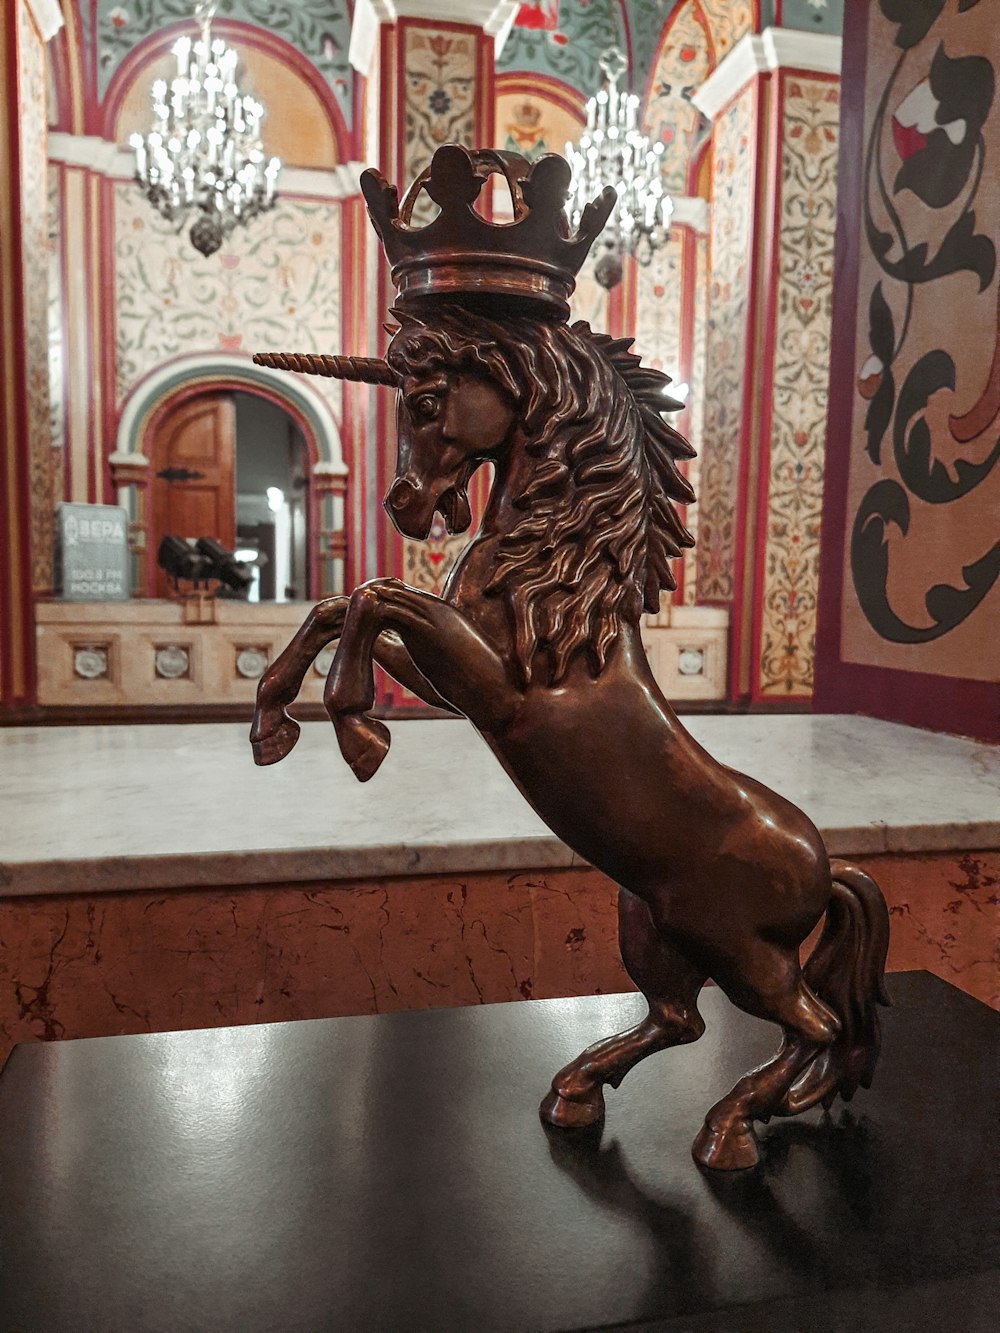 a statue of a horse with a crown on its head